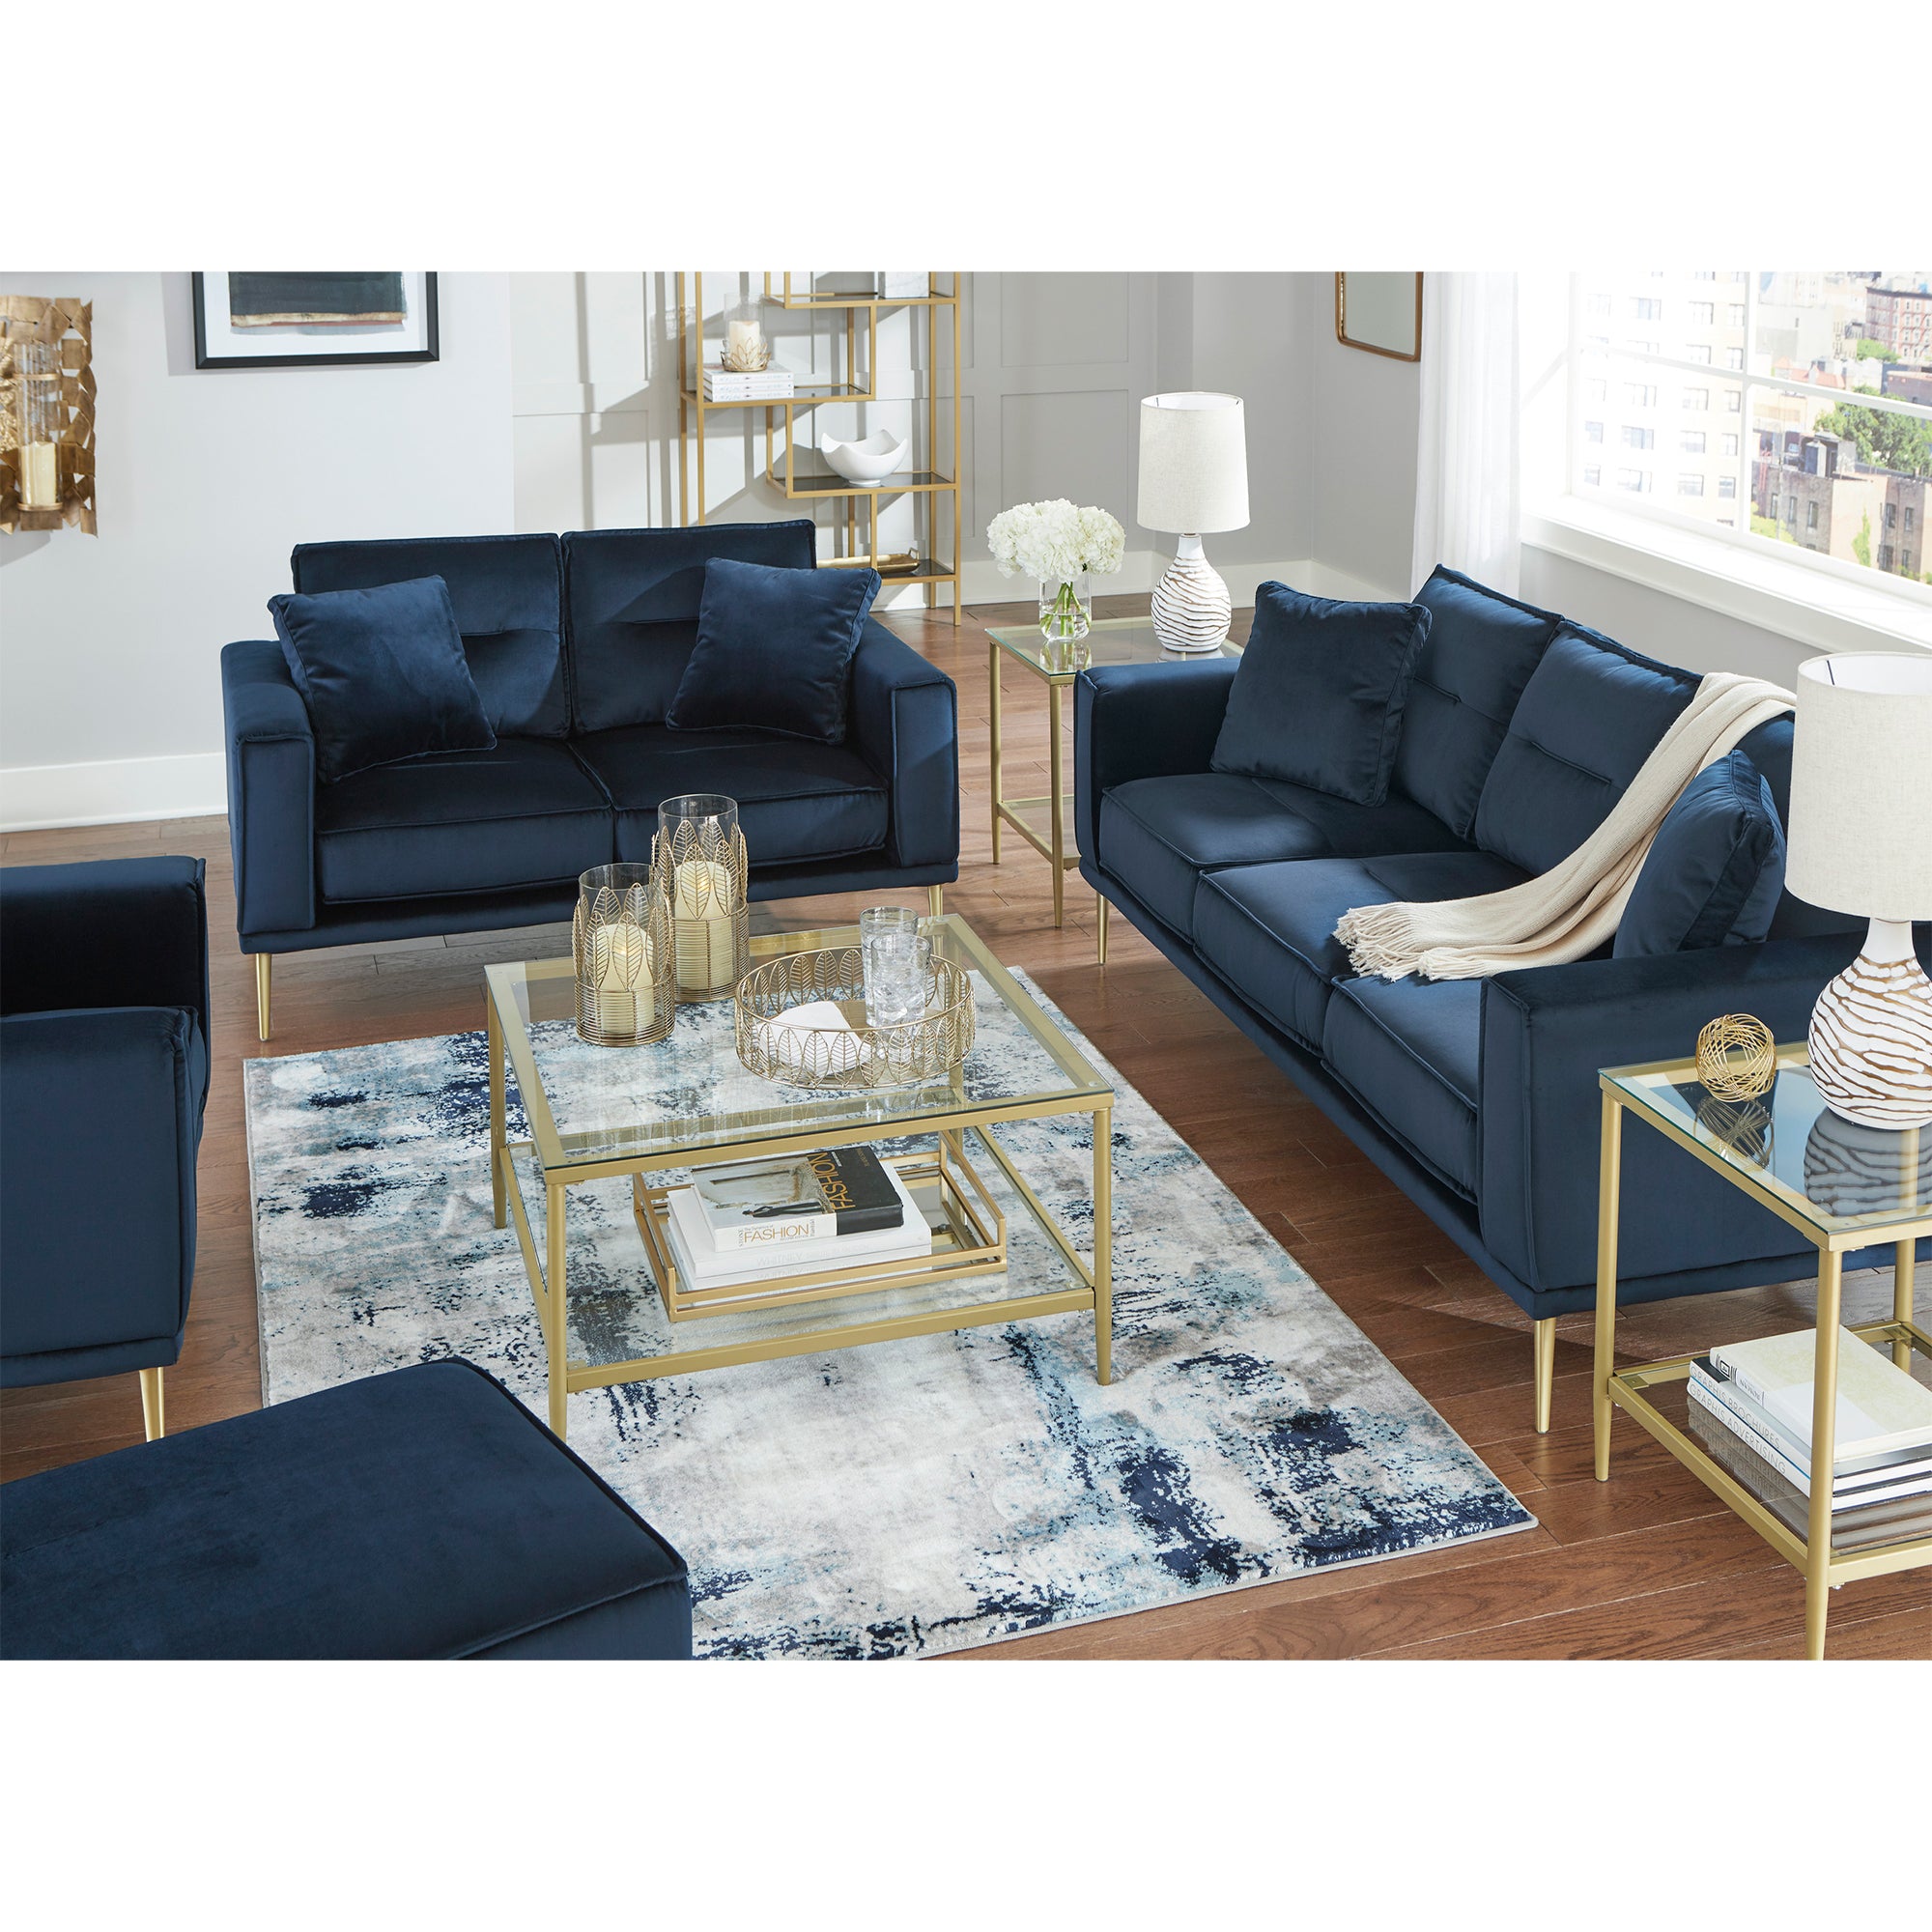 Macleary Sofa and Loveseat in Navy Color